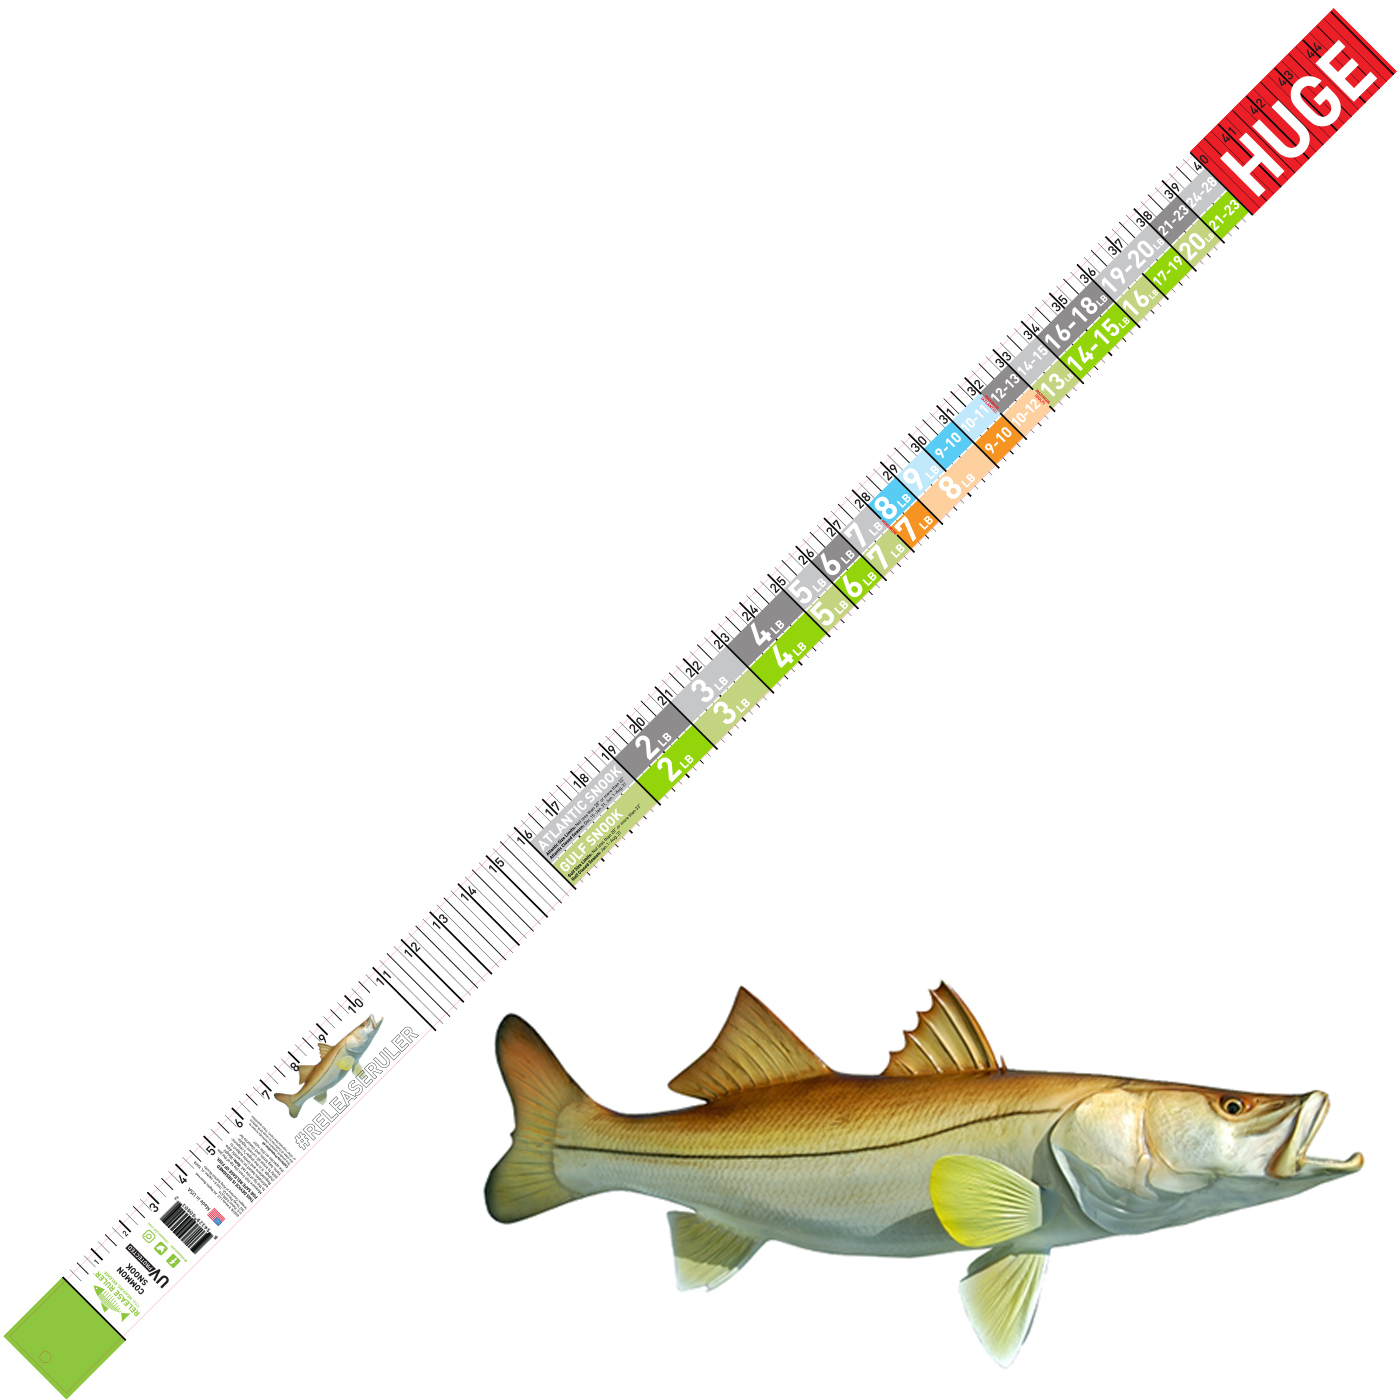 Snook Fish Fishing Decal Stickers, Custom Made In the USA